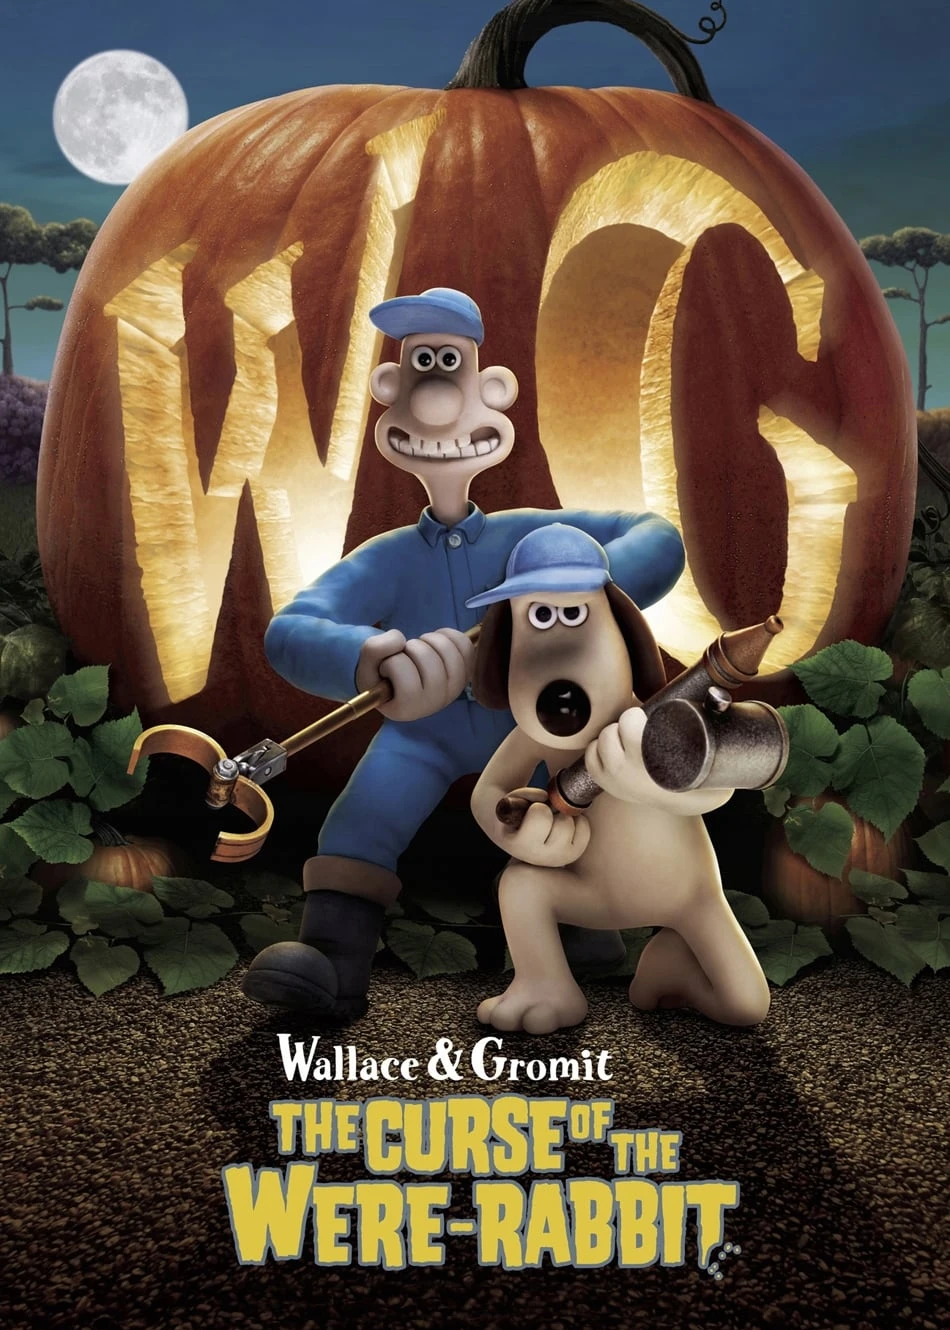 Wallace & Gromit: The Curse of the Were-Rabbit | Wallace & Gromit: The Curse of the Were-Rabbit (2005)